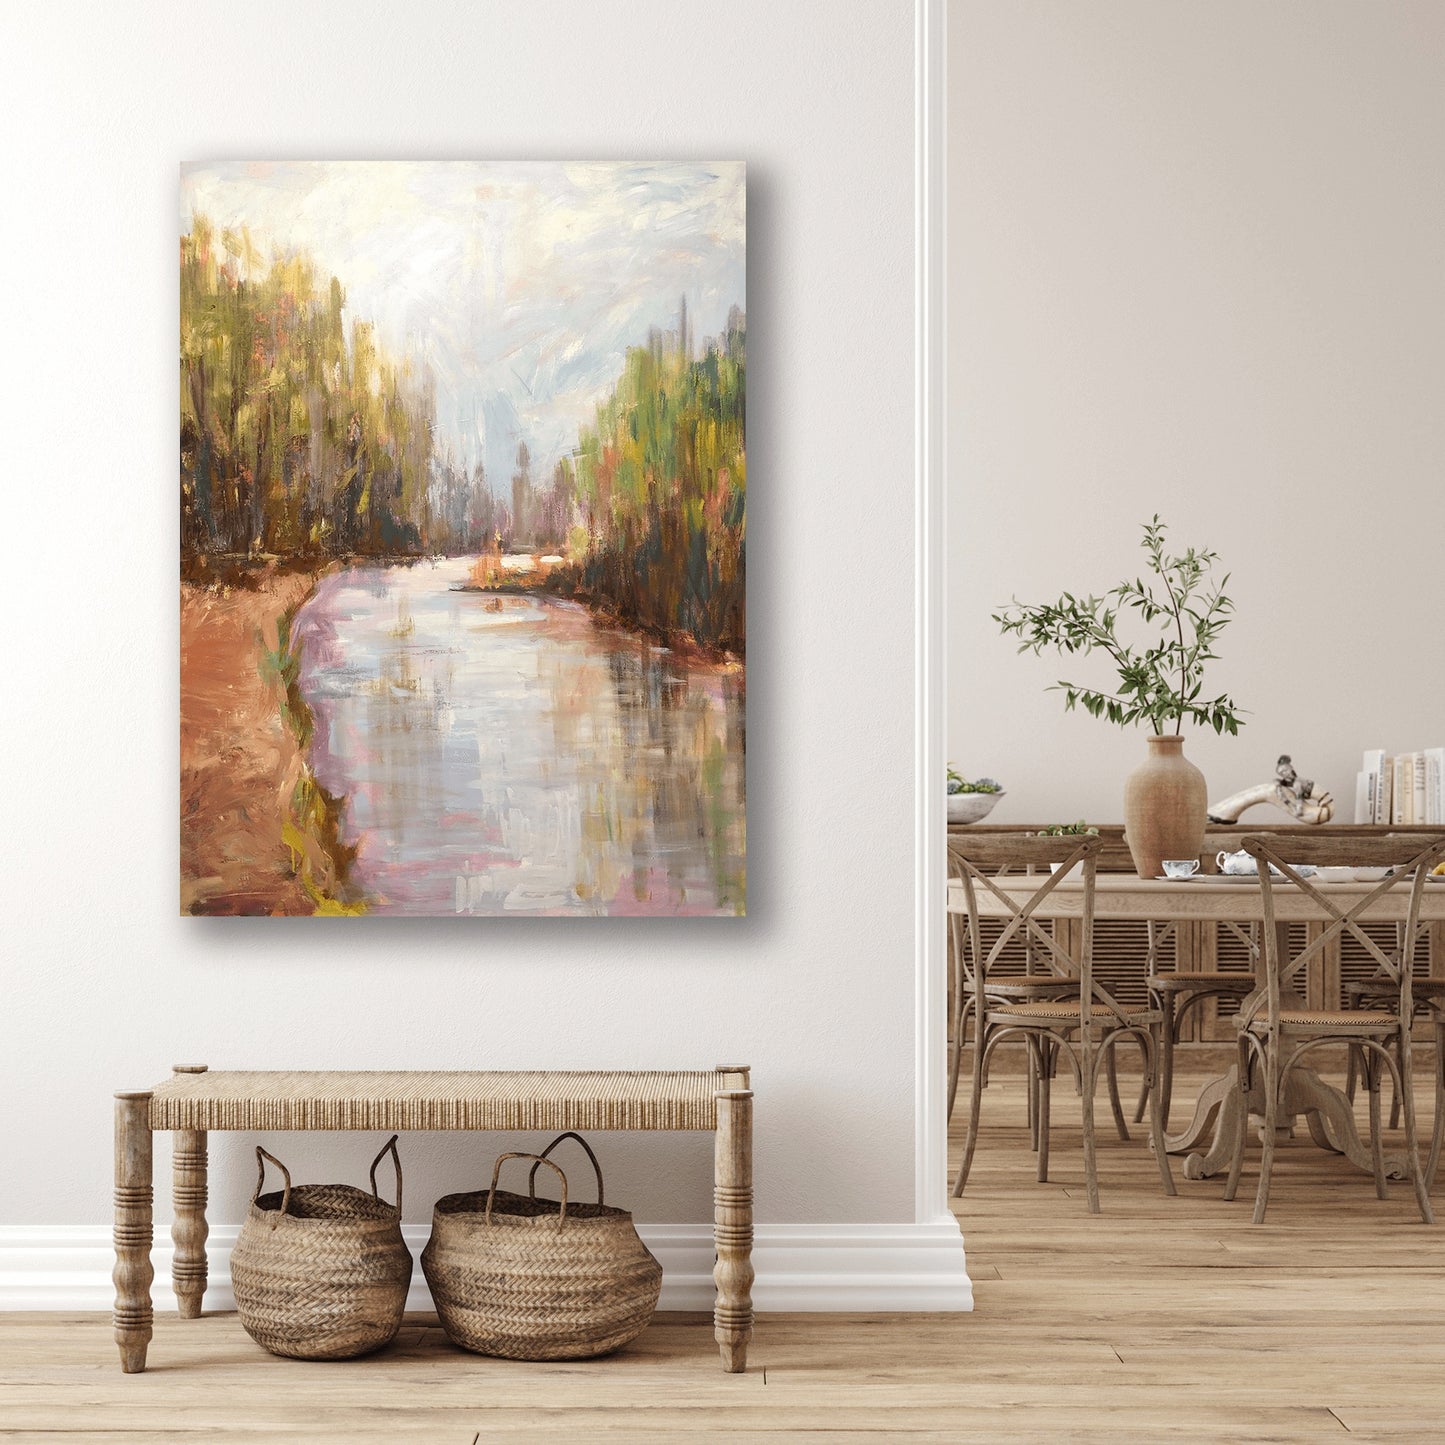 Wild Tranquility Glossy Poster Print